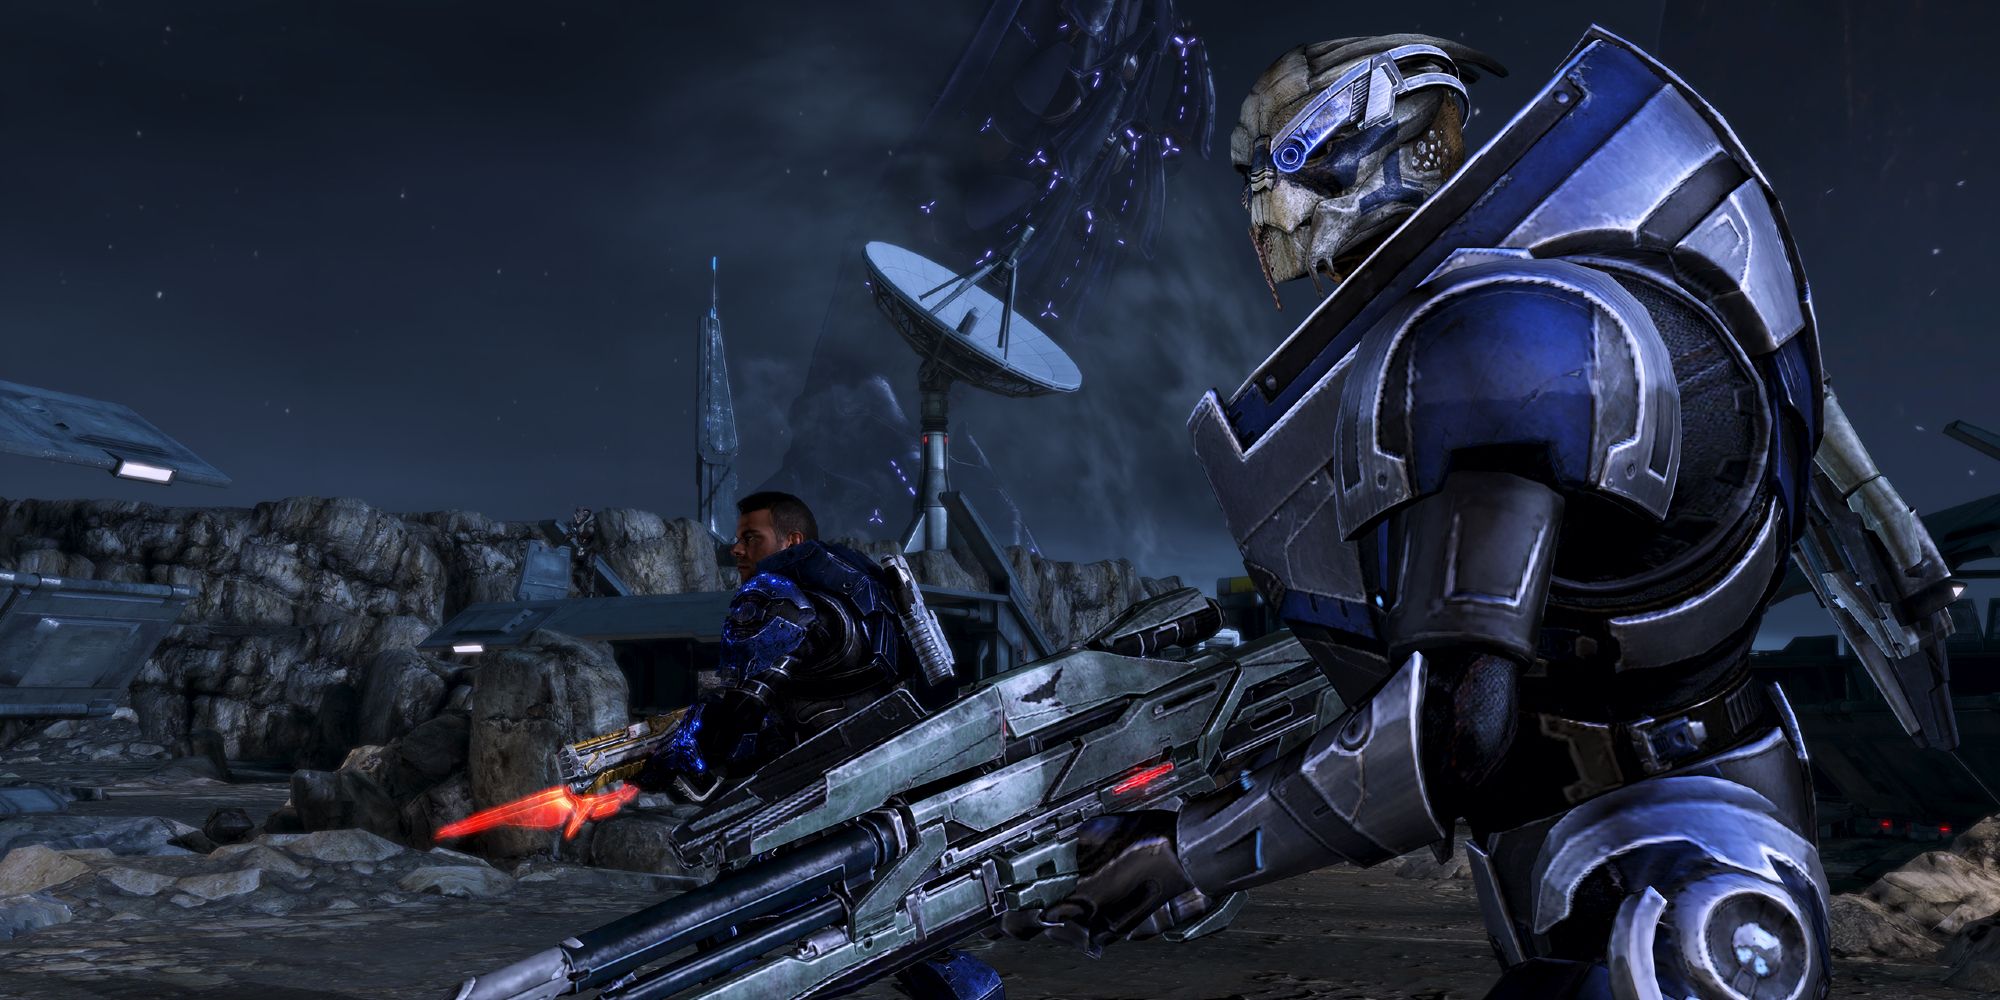 Garrus put together a Reaper Task Force between Mass Effect 2 and 3